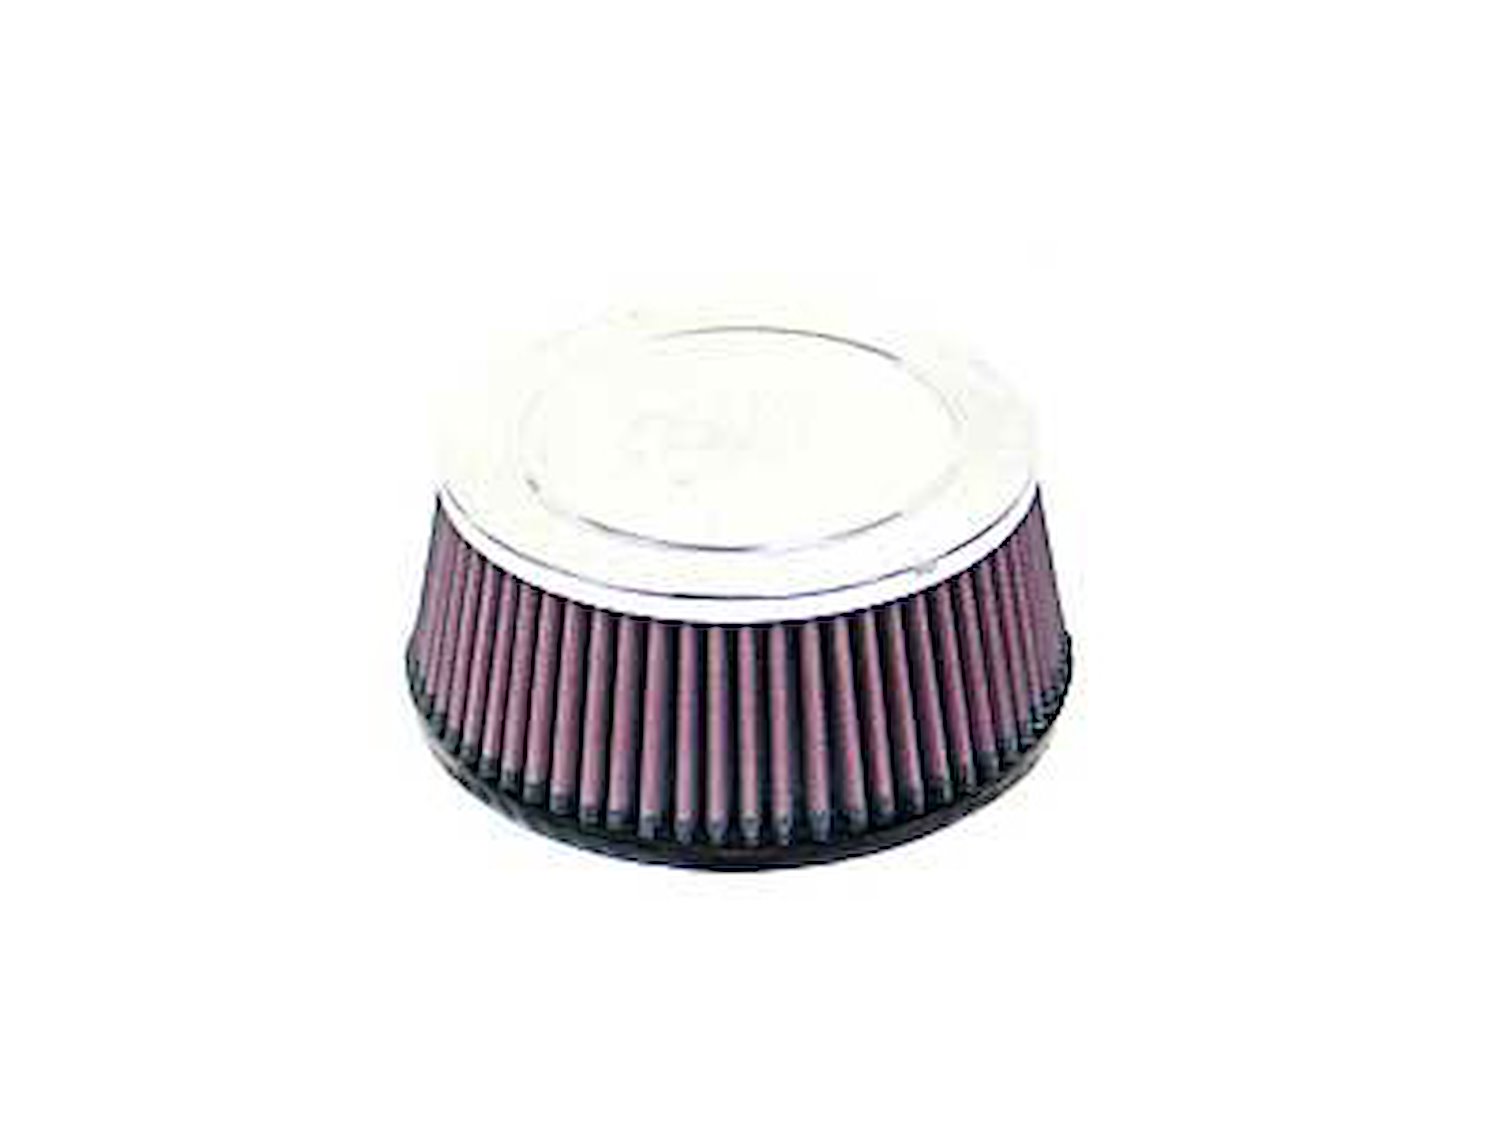 Tapered Filter Flange Dia.- F: 3.875", 98 mm